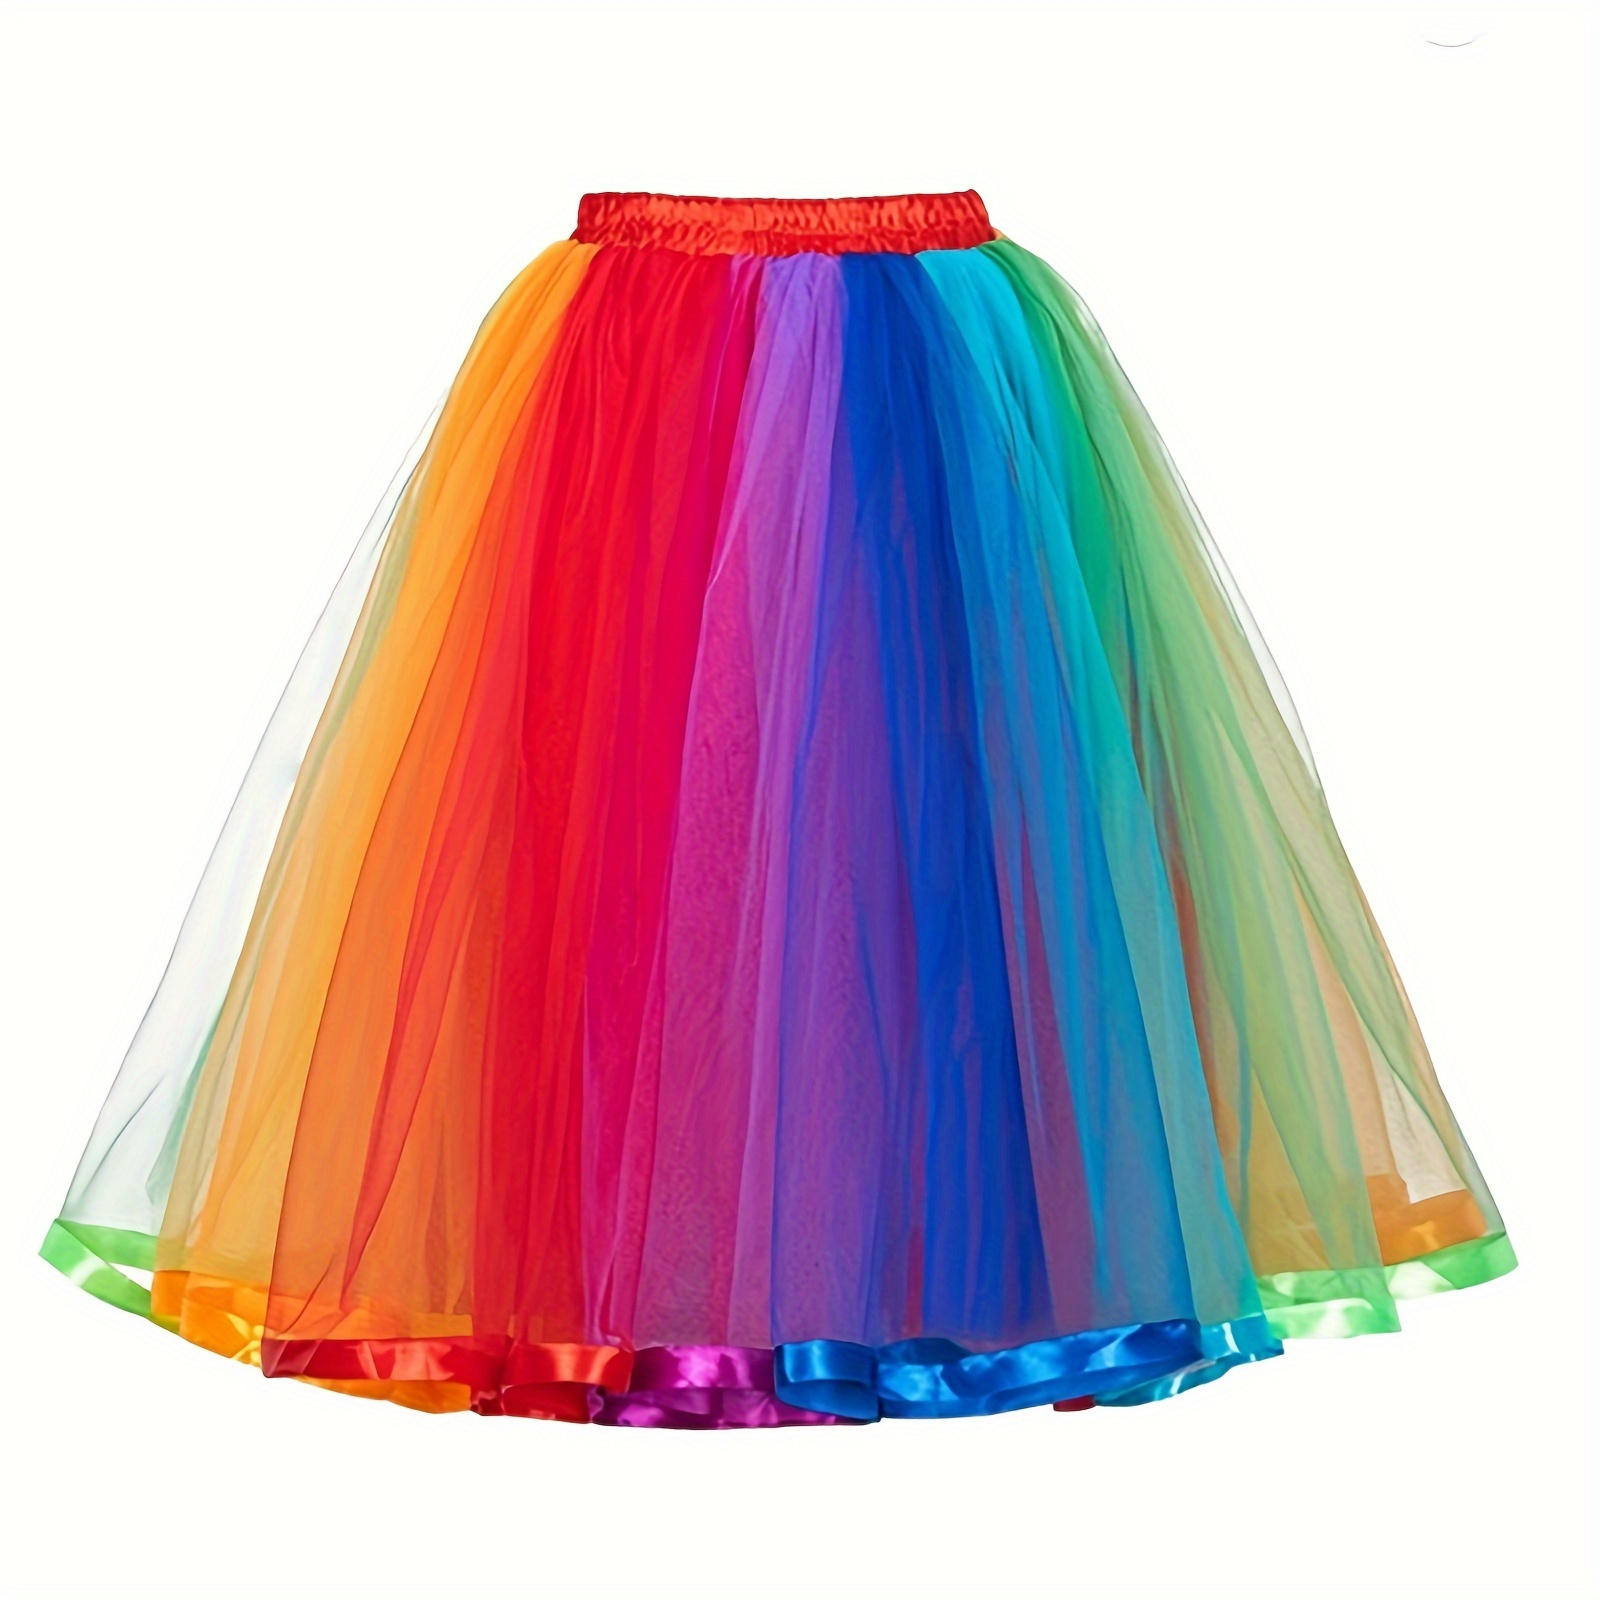 

Rainbow Tutu Skirt For Women, 80s Prom Dress Vintage Tulle Skirt, Colorful Tutu Costume For Halloween Party, Recital, Stage Performance, Birthdays And Theme Parties, Carnival, Makeup Dance Parties